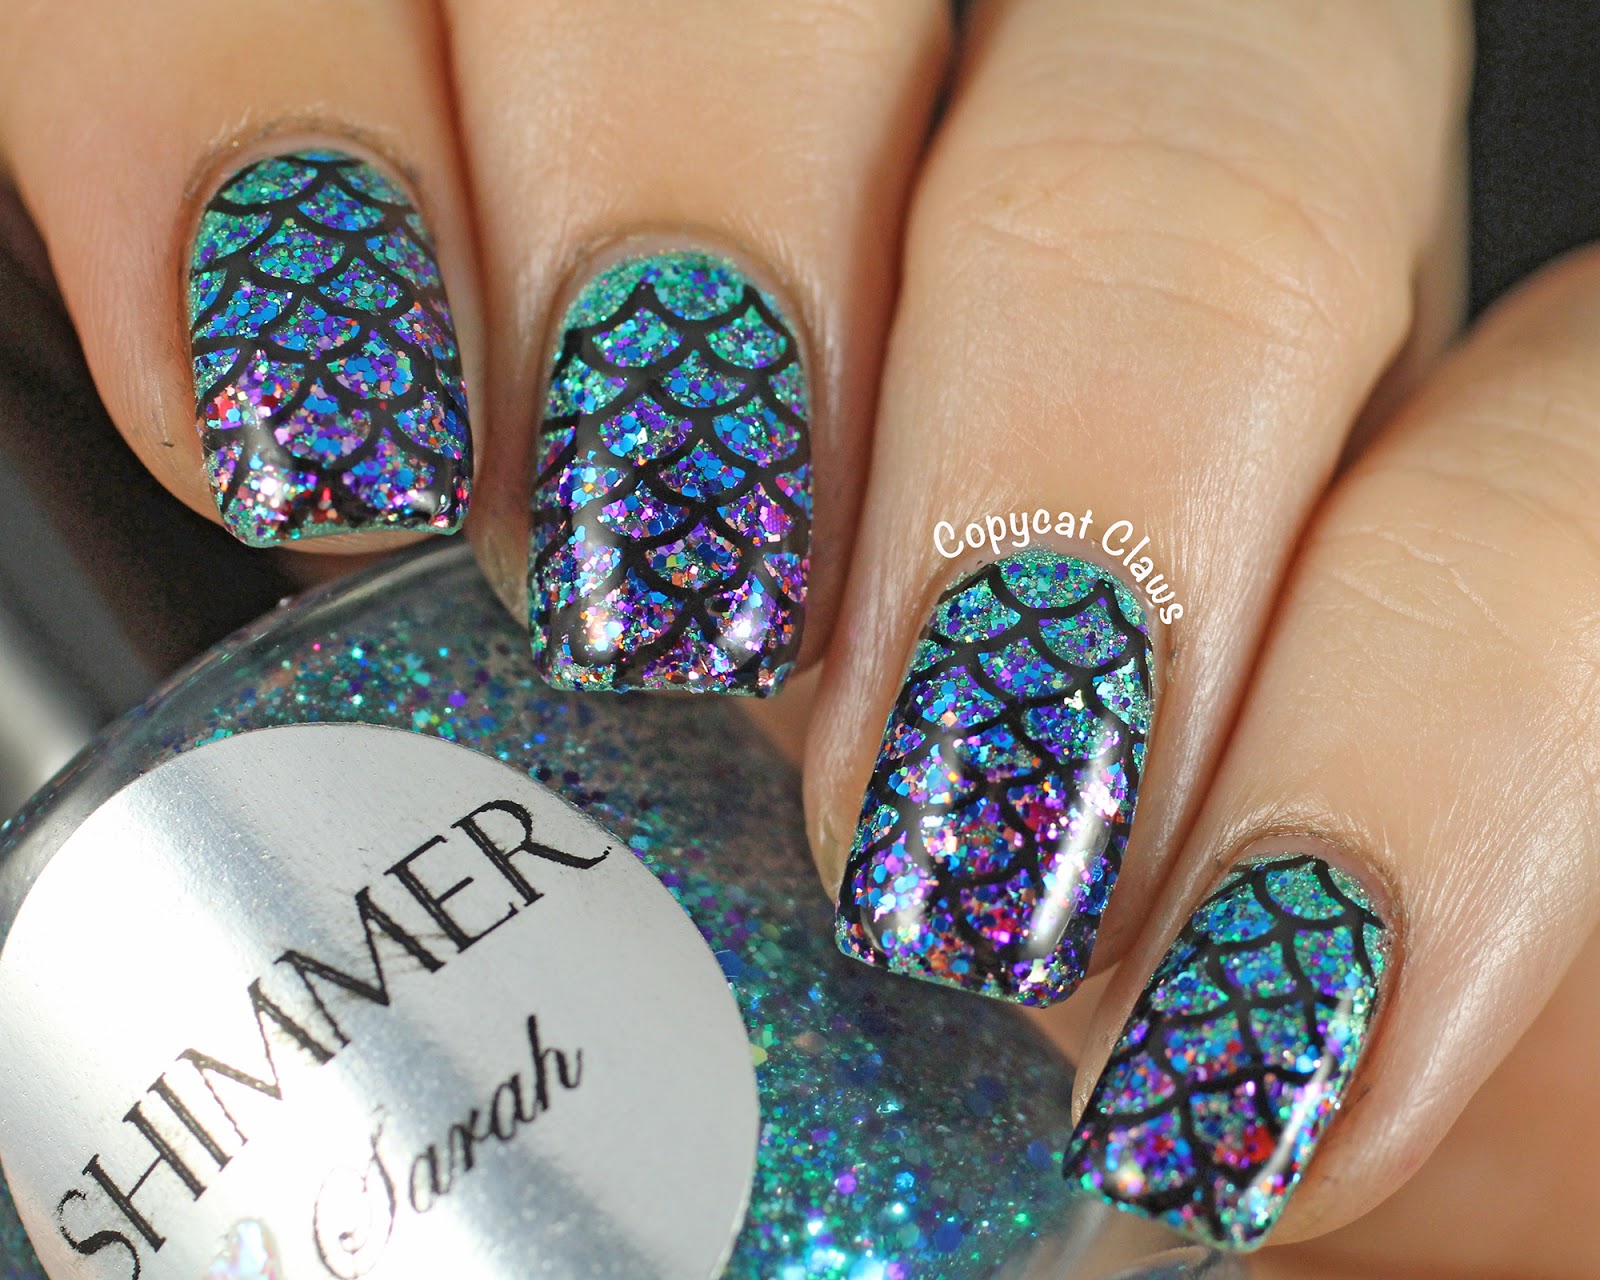 8. Glitter Mermaid Nails for a Beach Vacation - wide 8